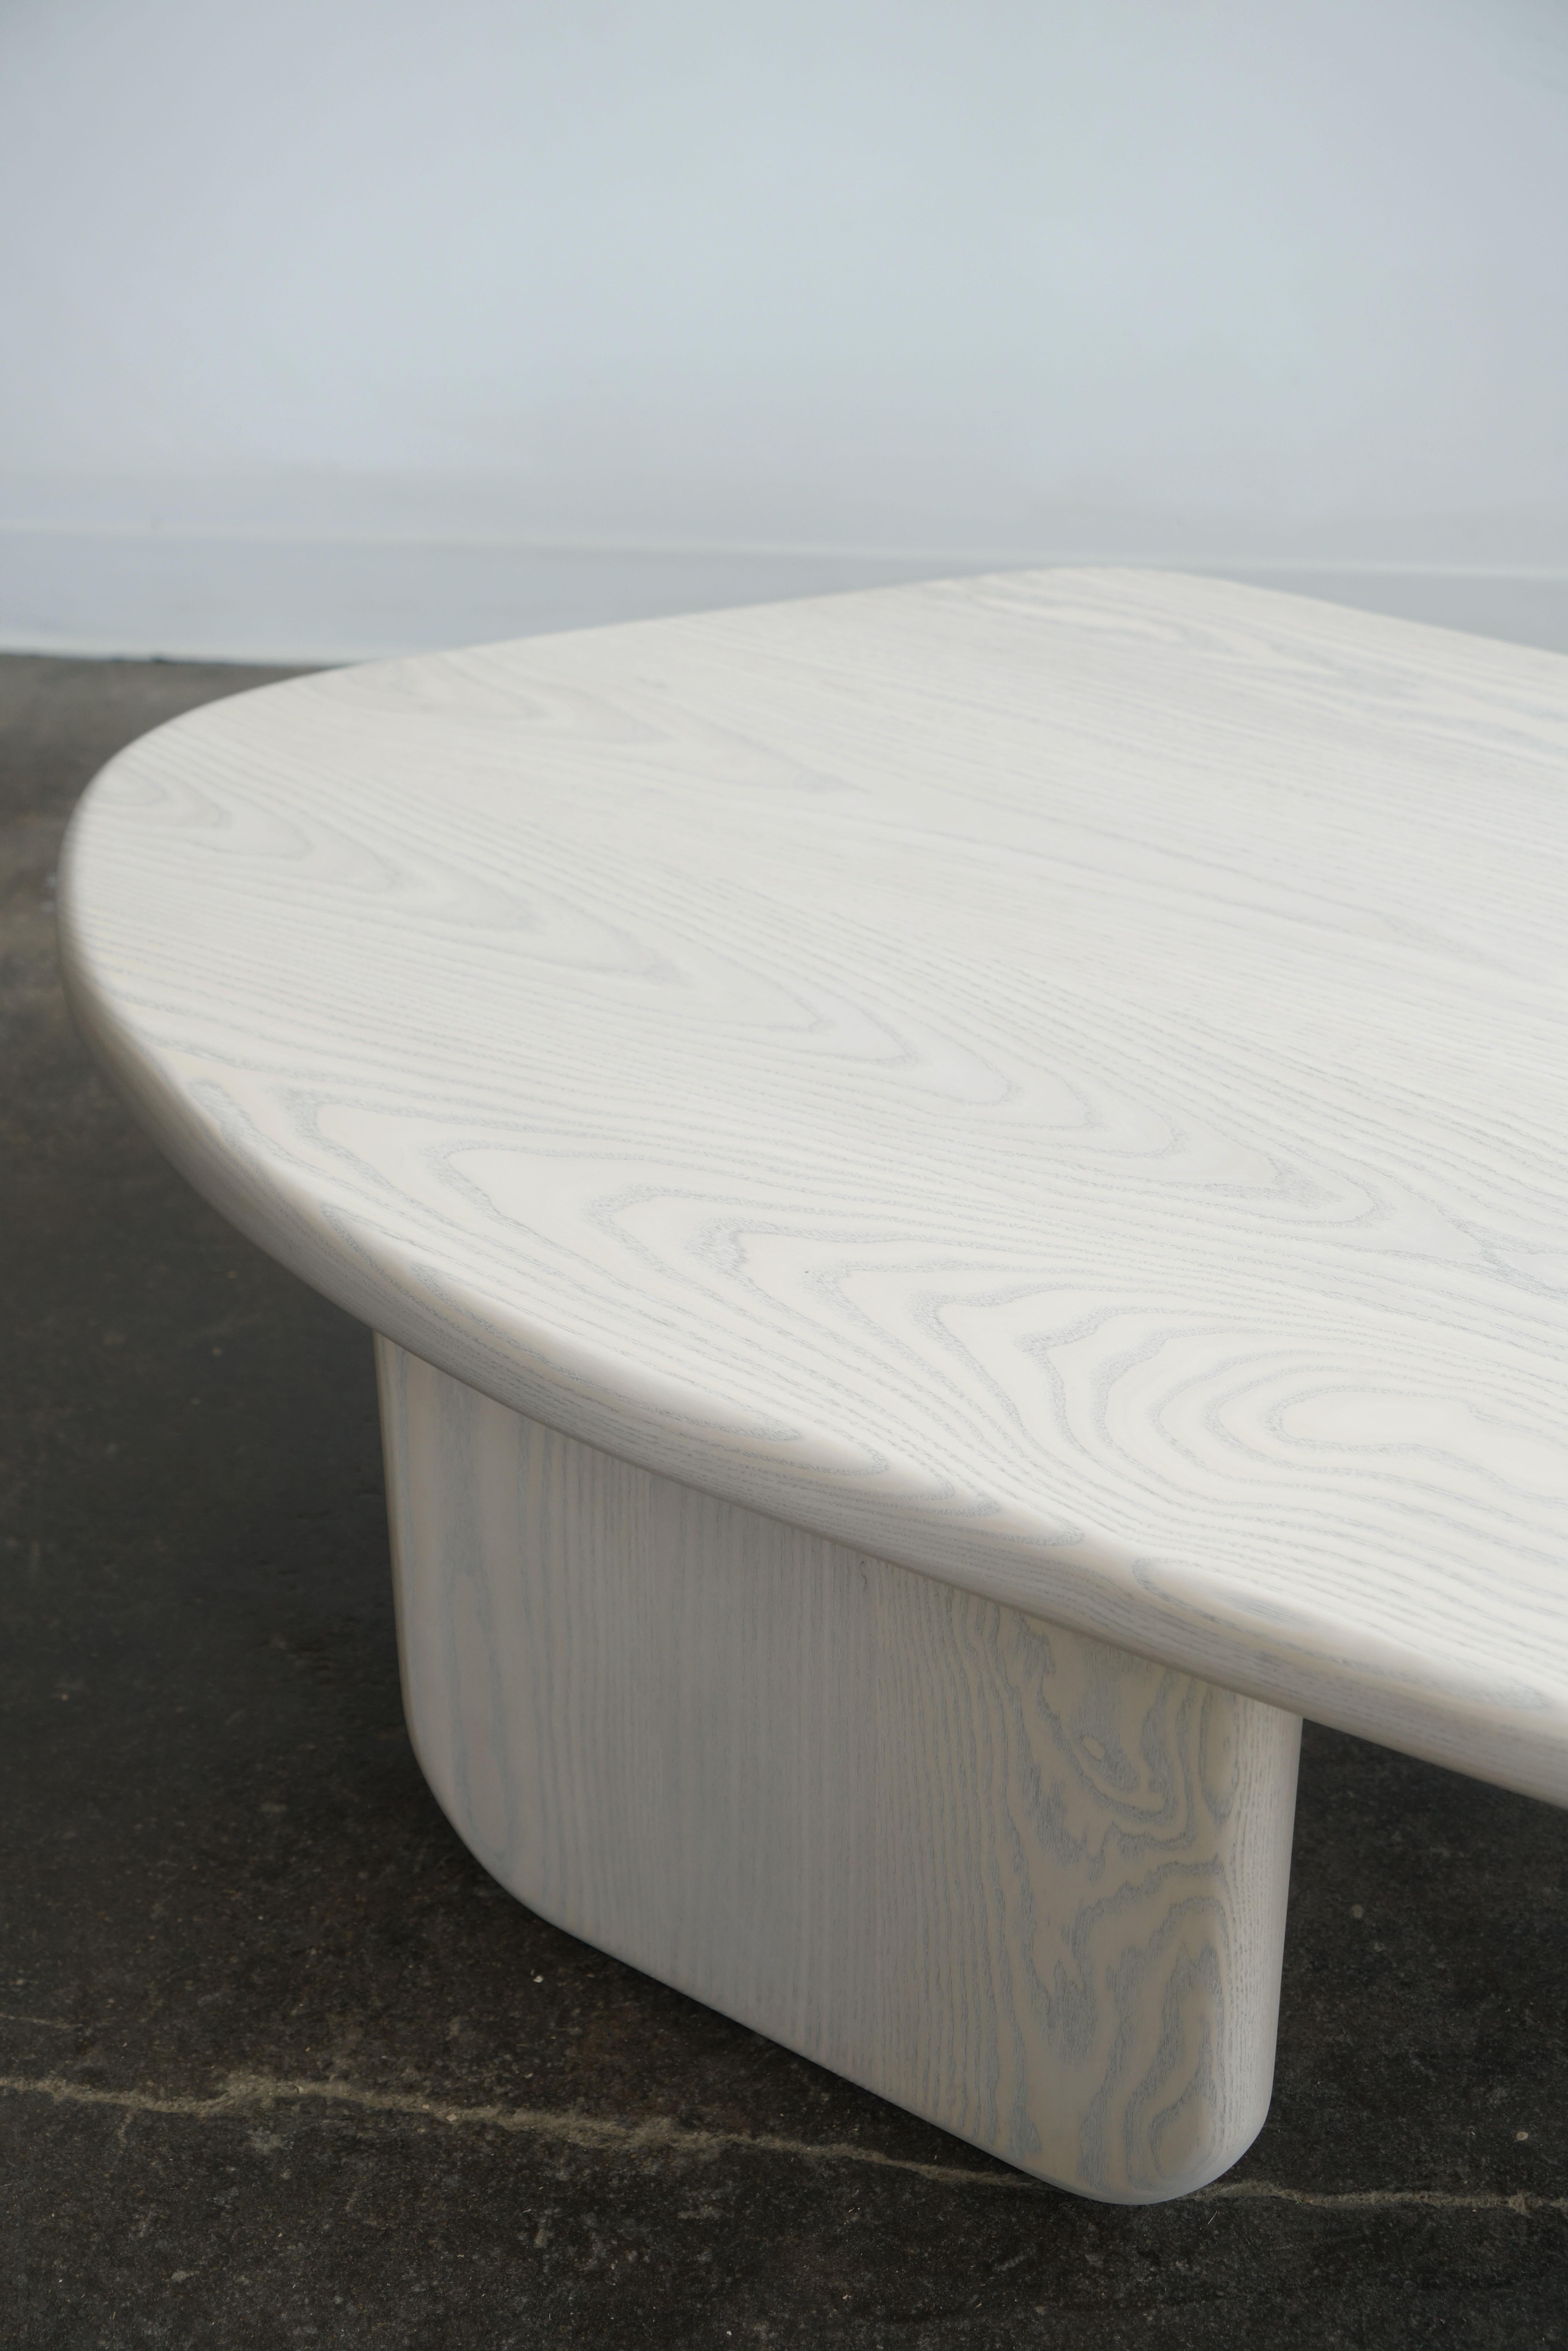 Bleached Organic Shaped Modern Coffee Table by Last Workshop, Silk Grey Ash For Sale